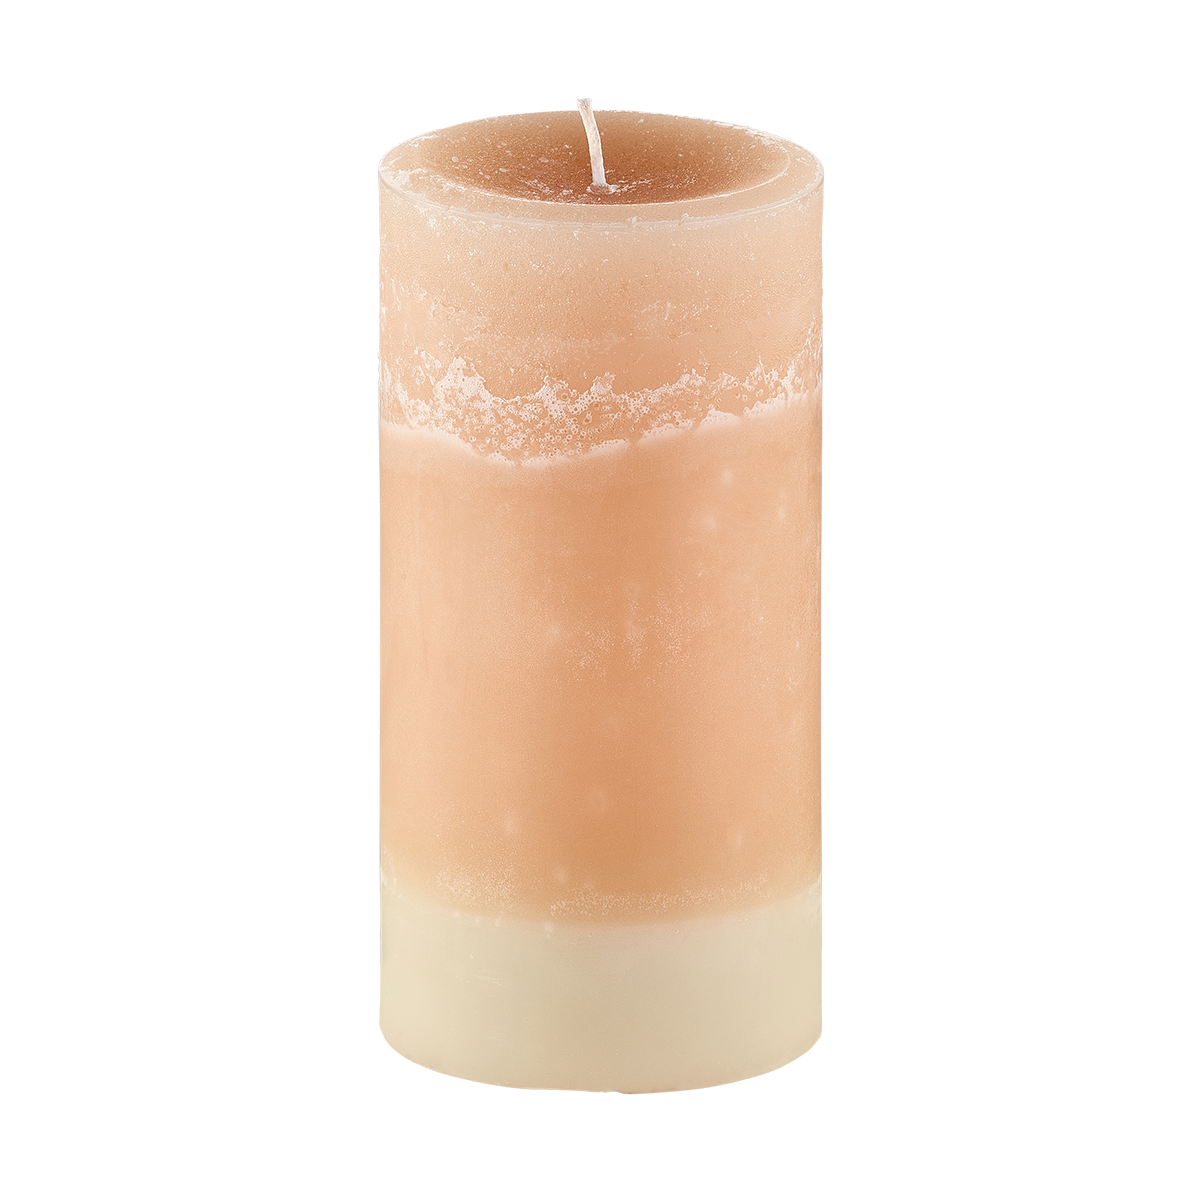 0000_1_wick_candle_pillar_blonde_tobacco___honney_019_png_c590c68d-0040-4e53-a670-61ba4d1bf823.png